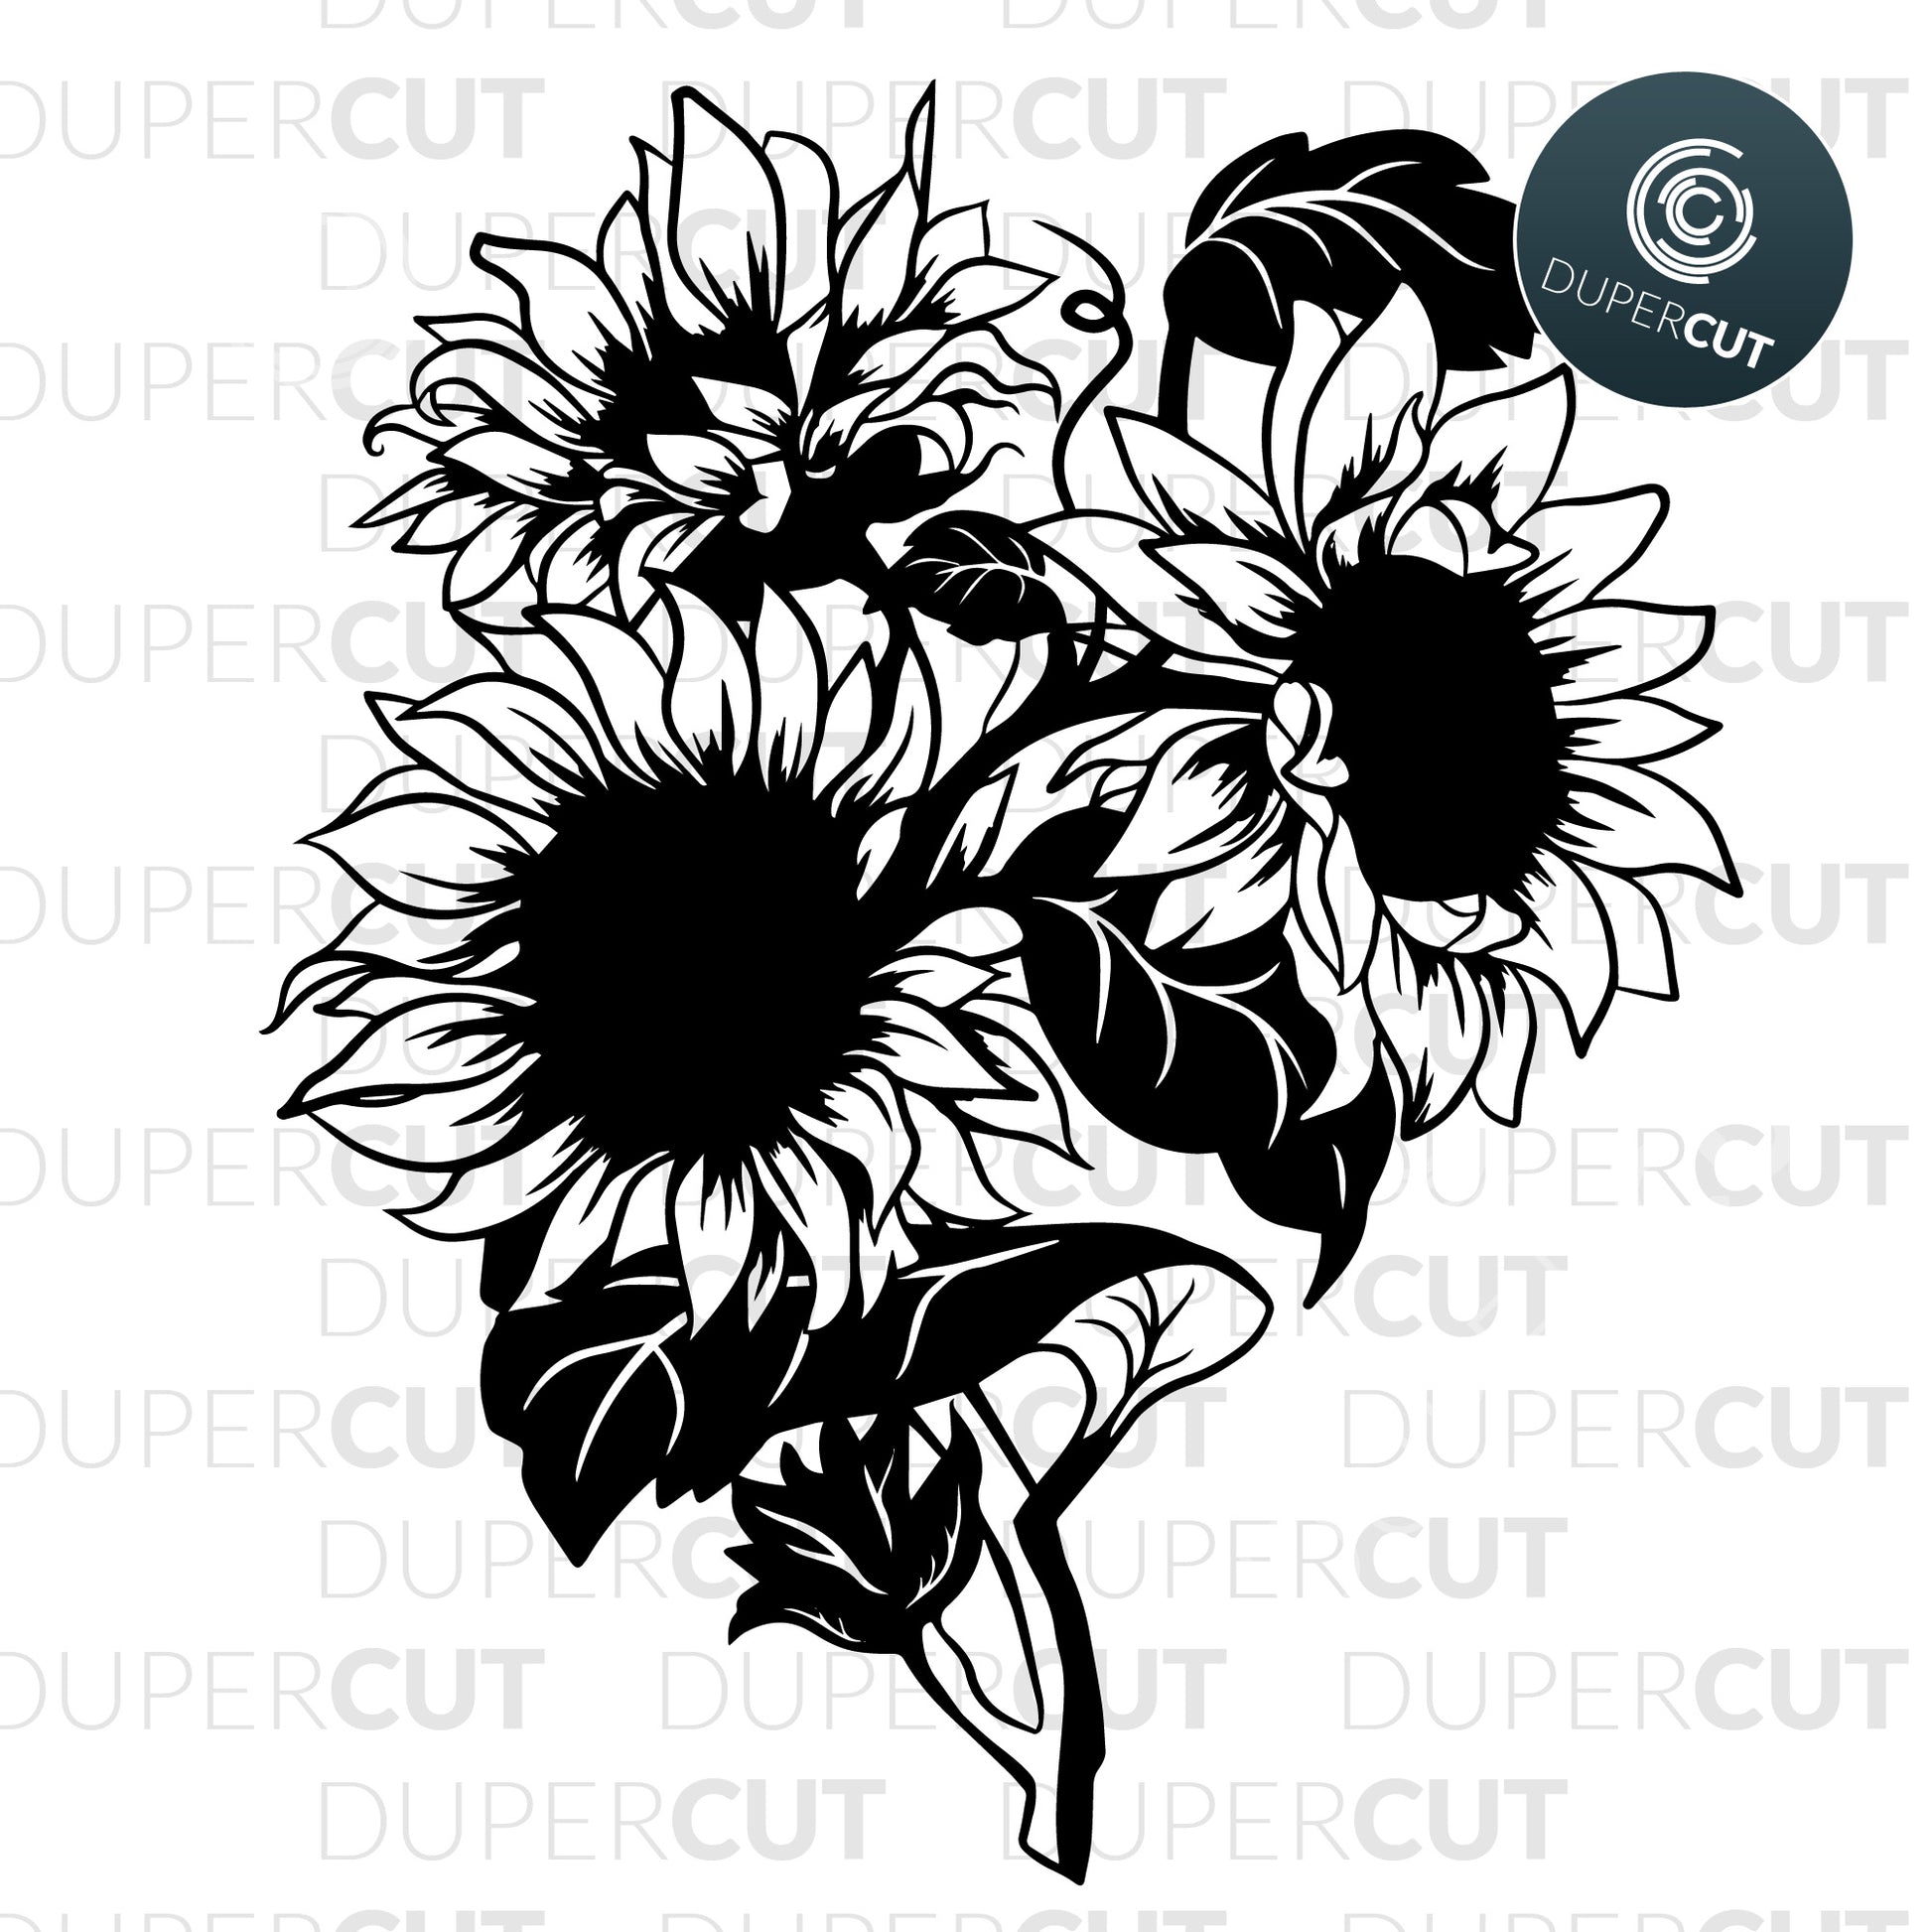 Sunflowers detailed vector illustration, print on demand  template - SVG DXF PNG files for Cricut, Glowforge, Silhouette Cameo, CNC Machines